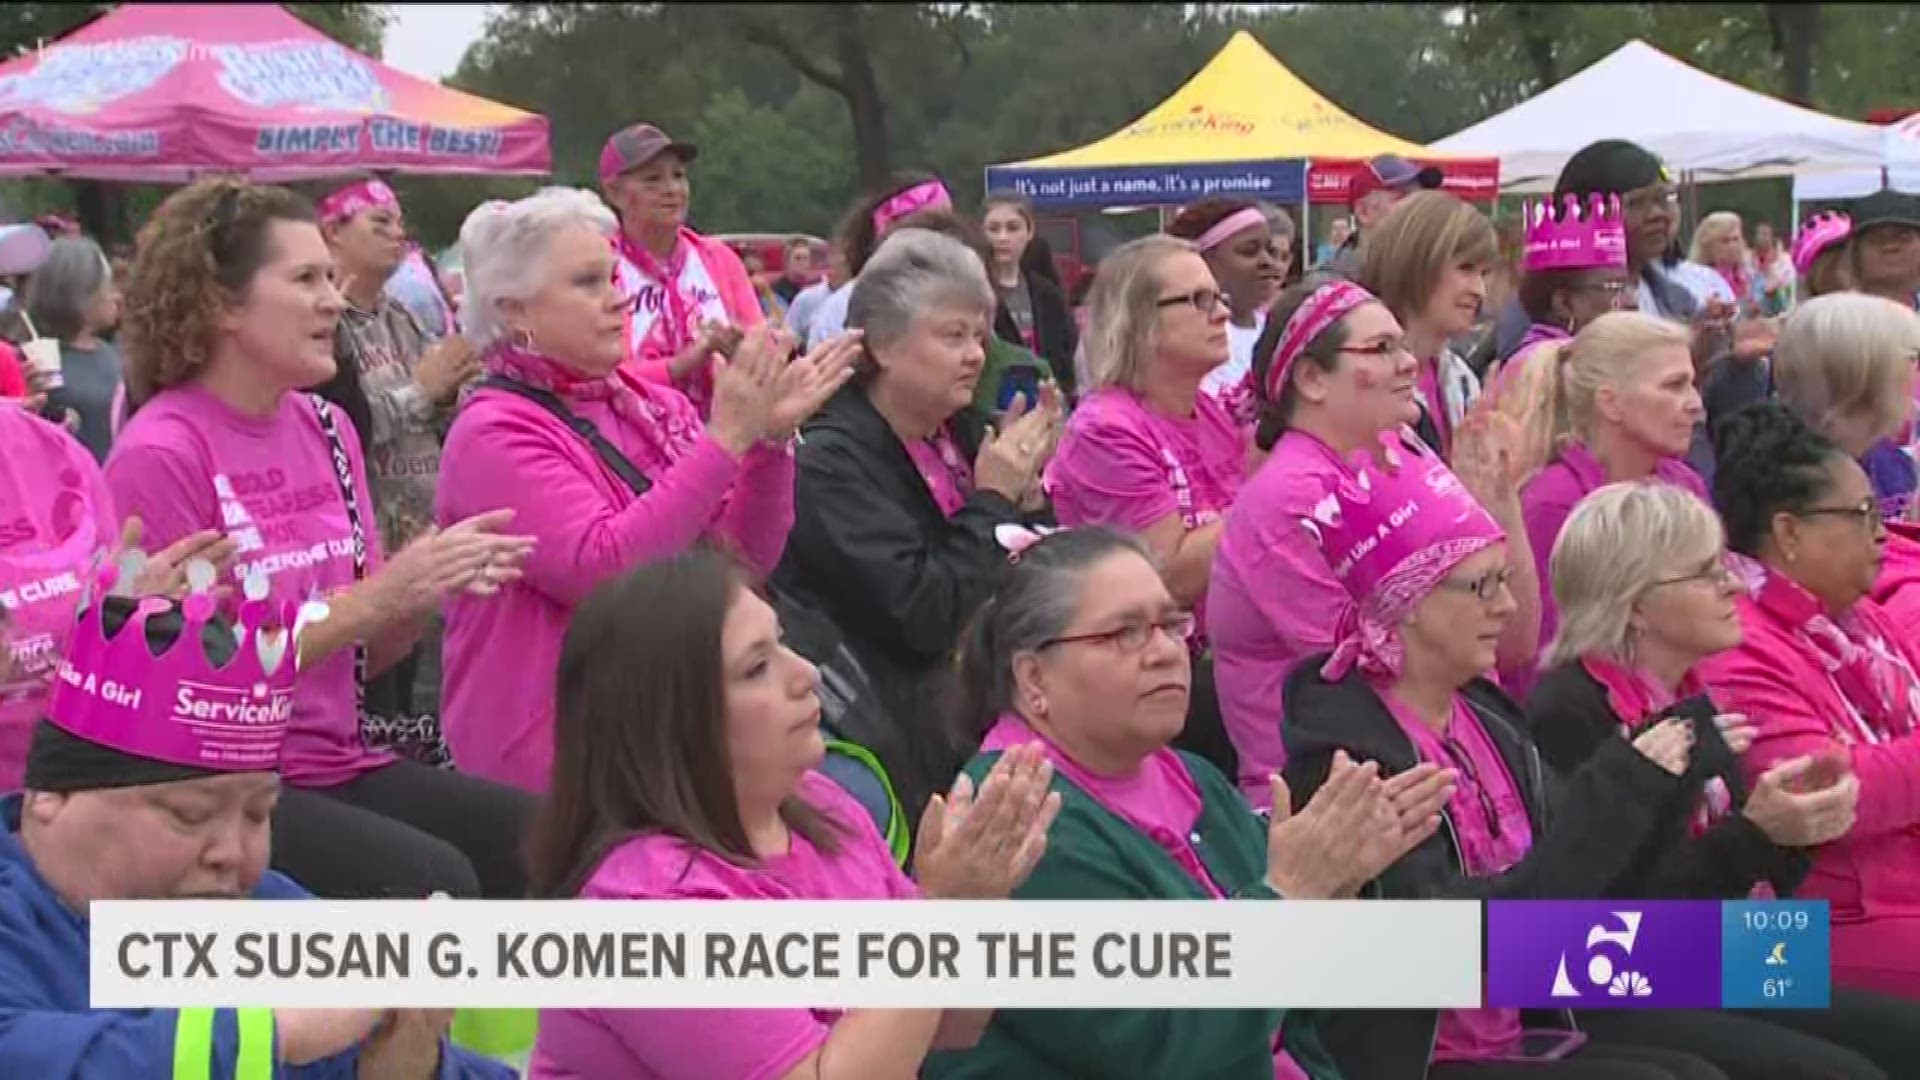 The 18th Central Texas Susan G. Komen Race for the Cure was held in Waco.